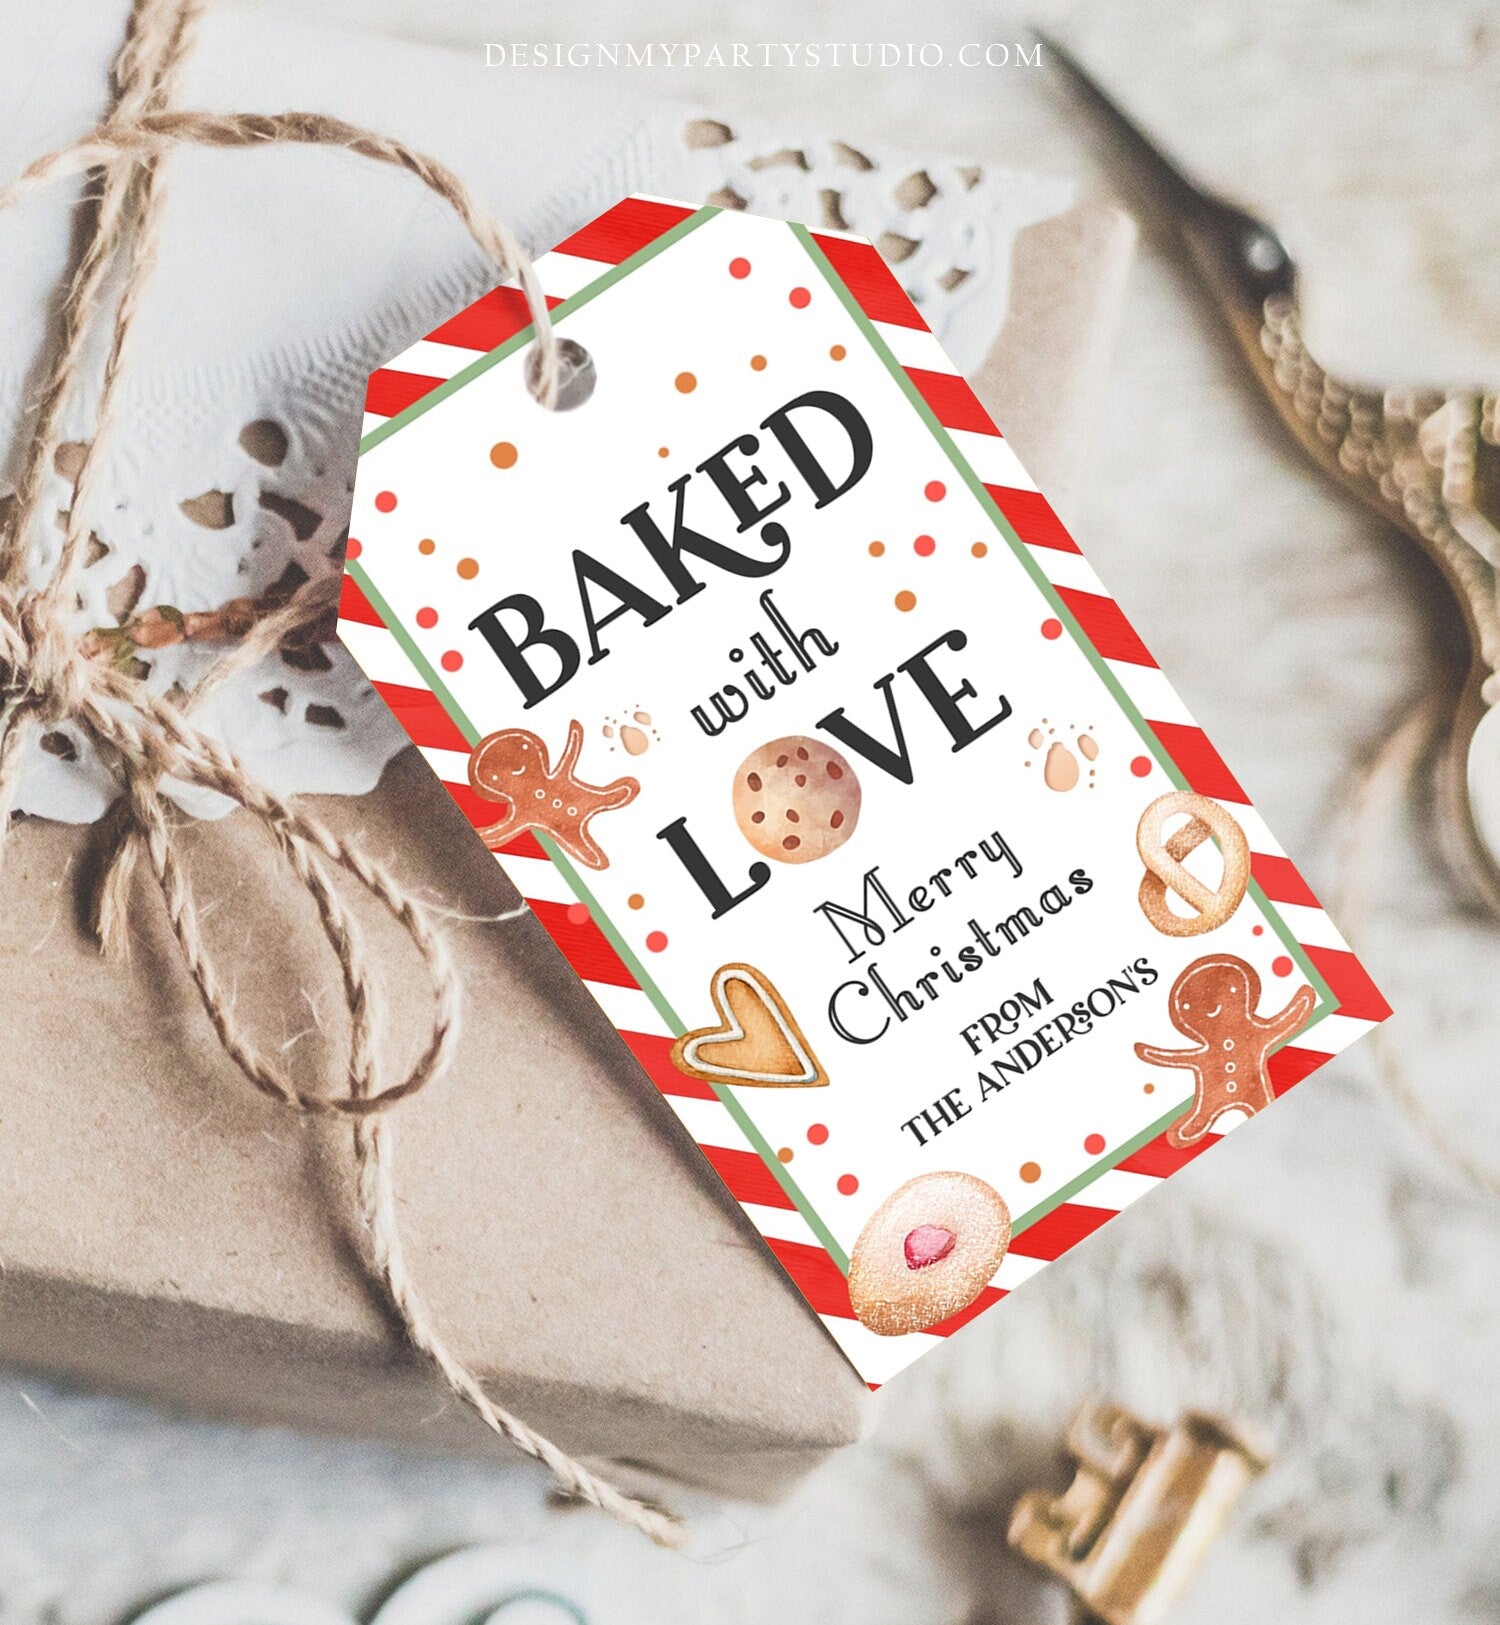 Editable Cookie Tag Baked With Love Tag Merry Christmas Favor Tag Cookie Gift Cookie Exchange Download Printable Template Corjl 0358 0443